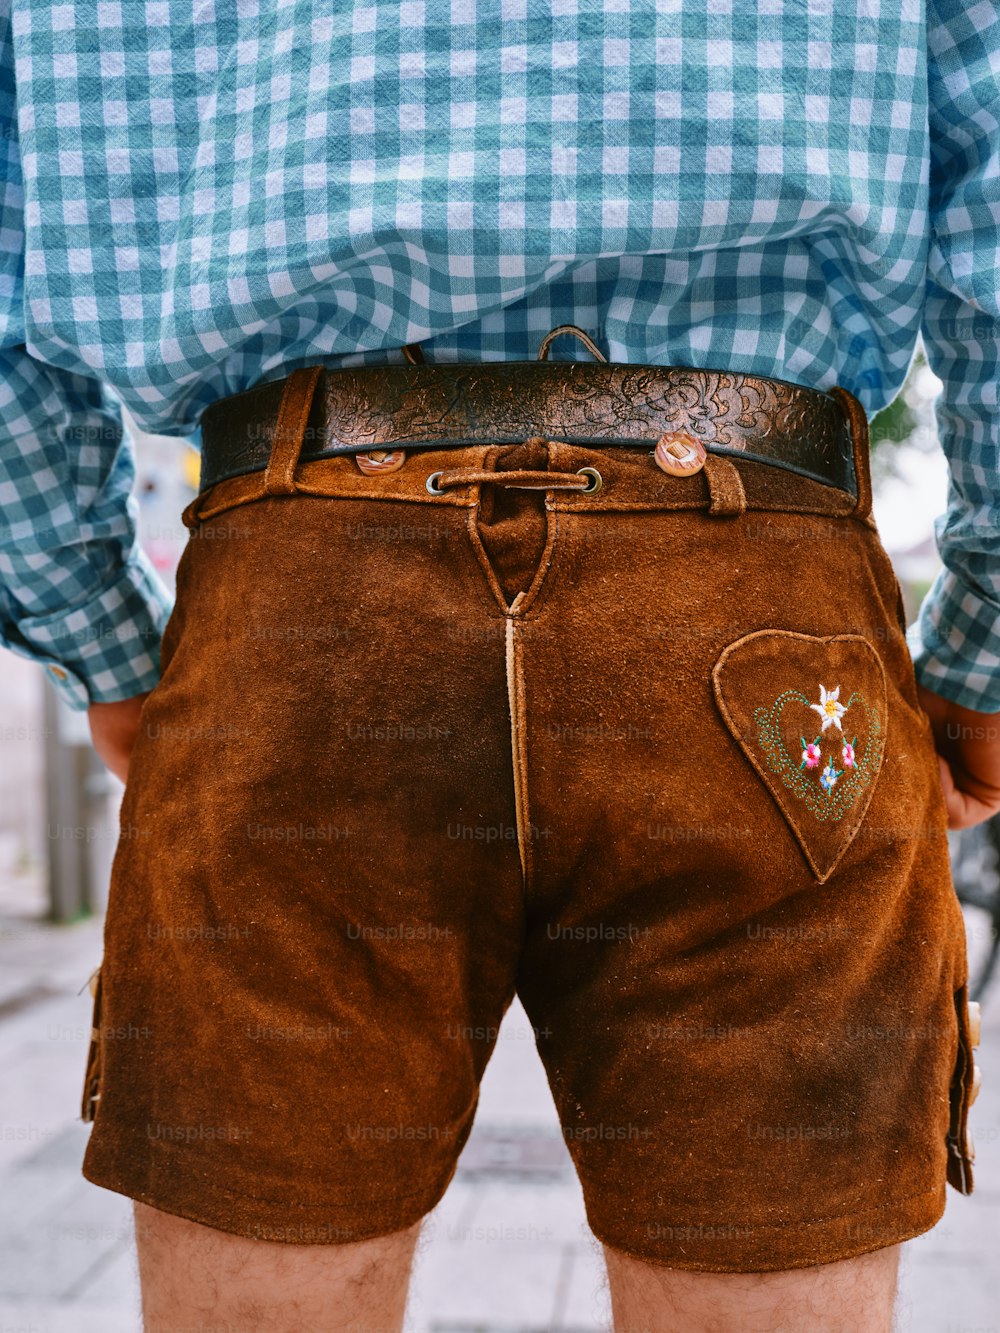 a close up of a person wearing brown shorts